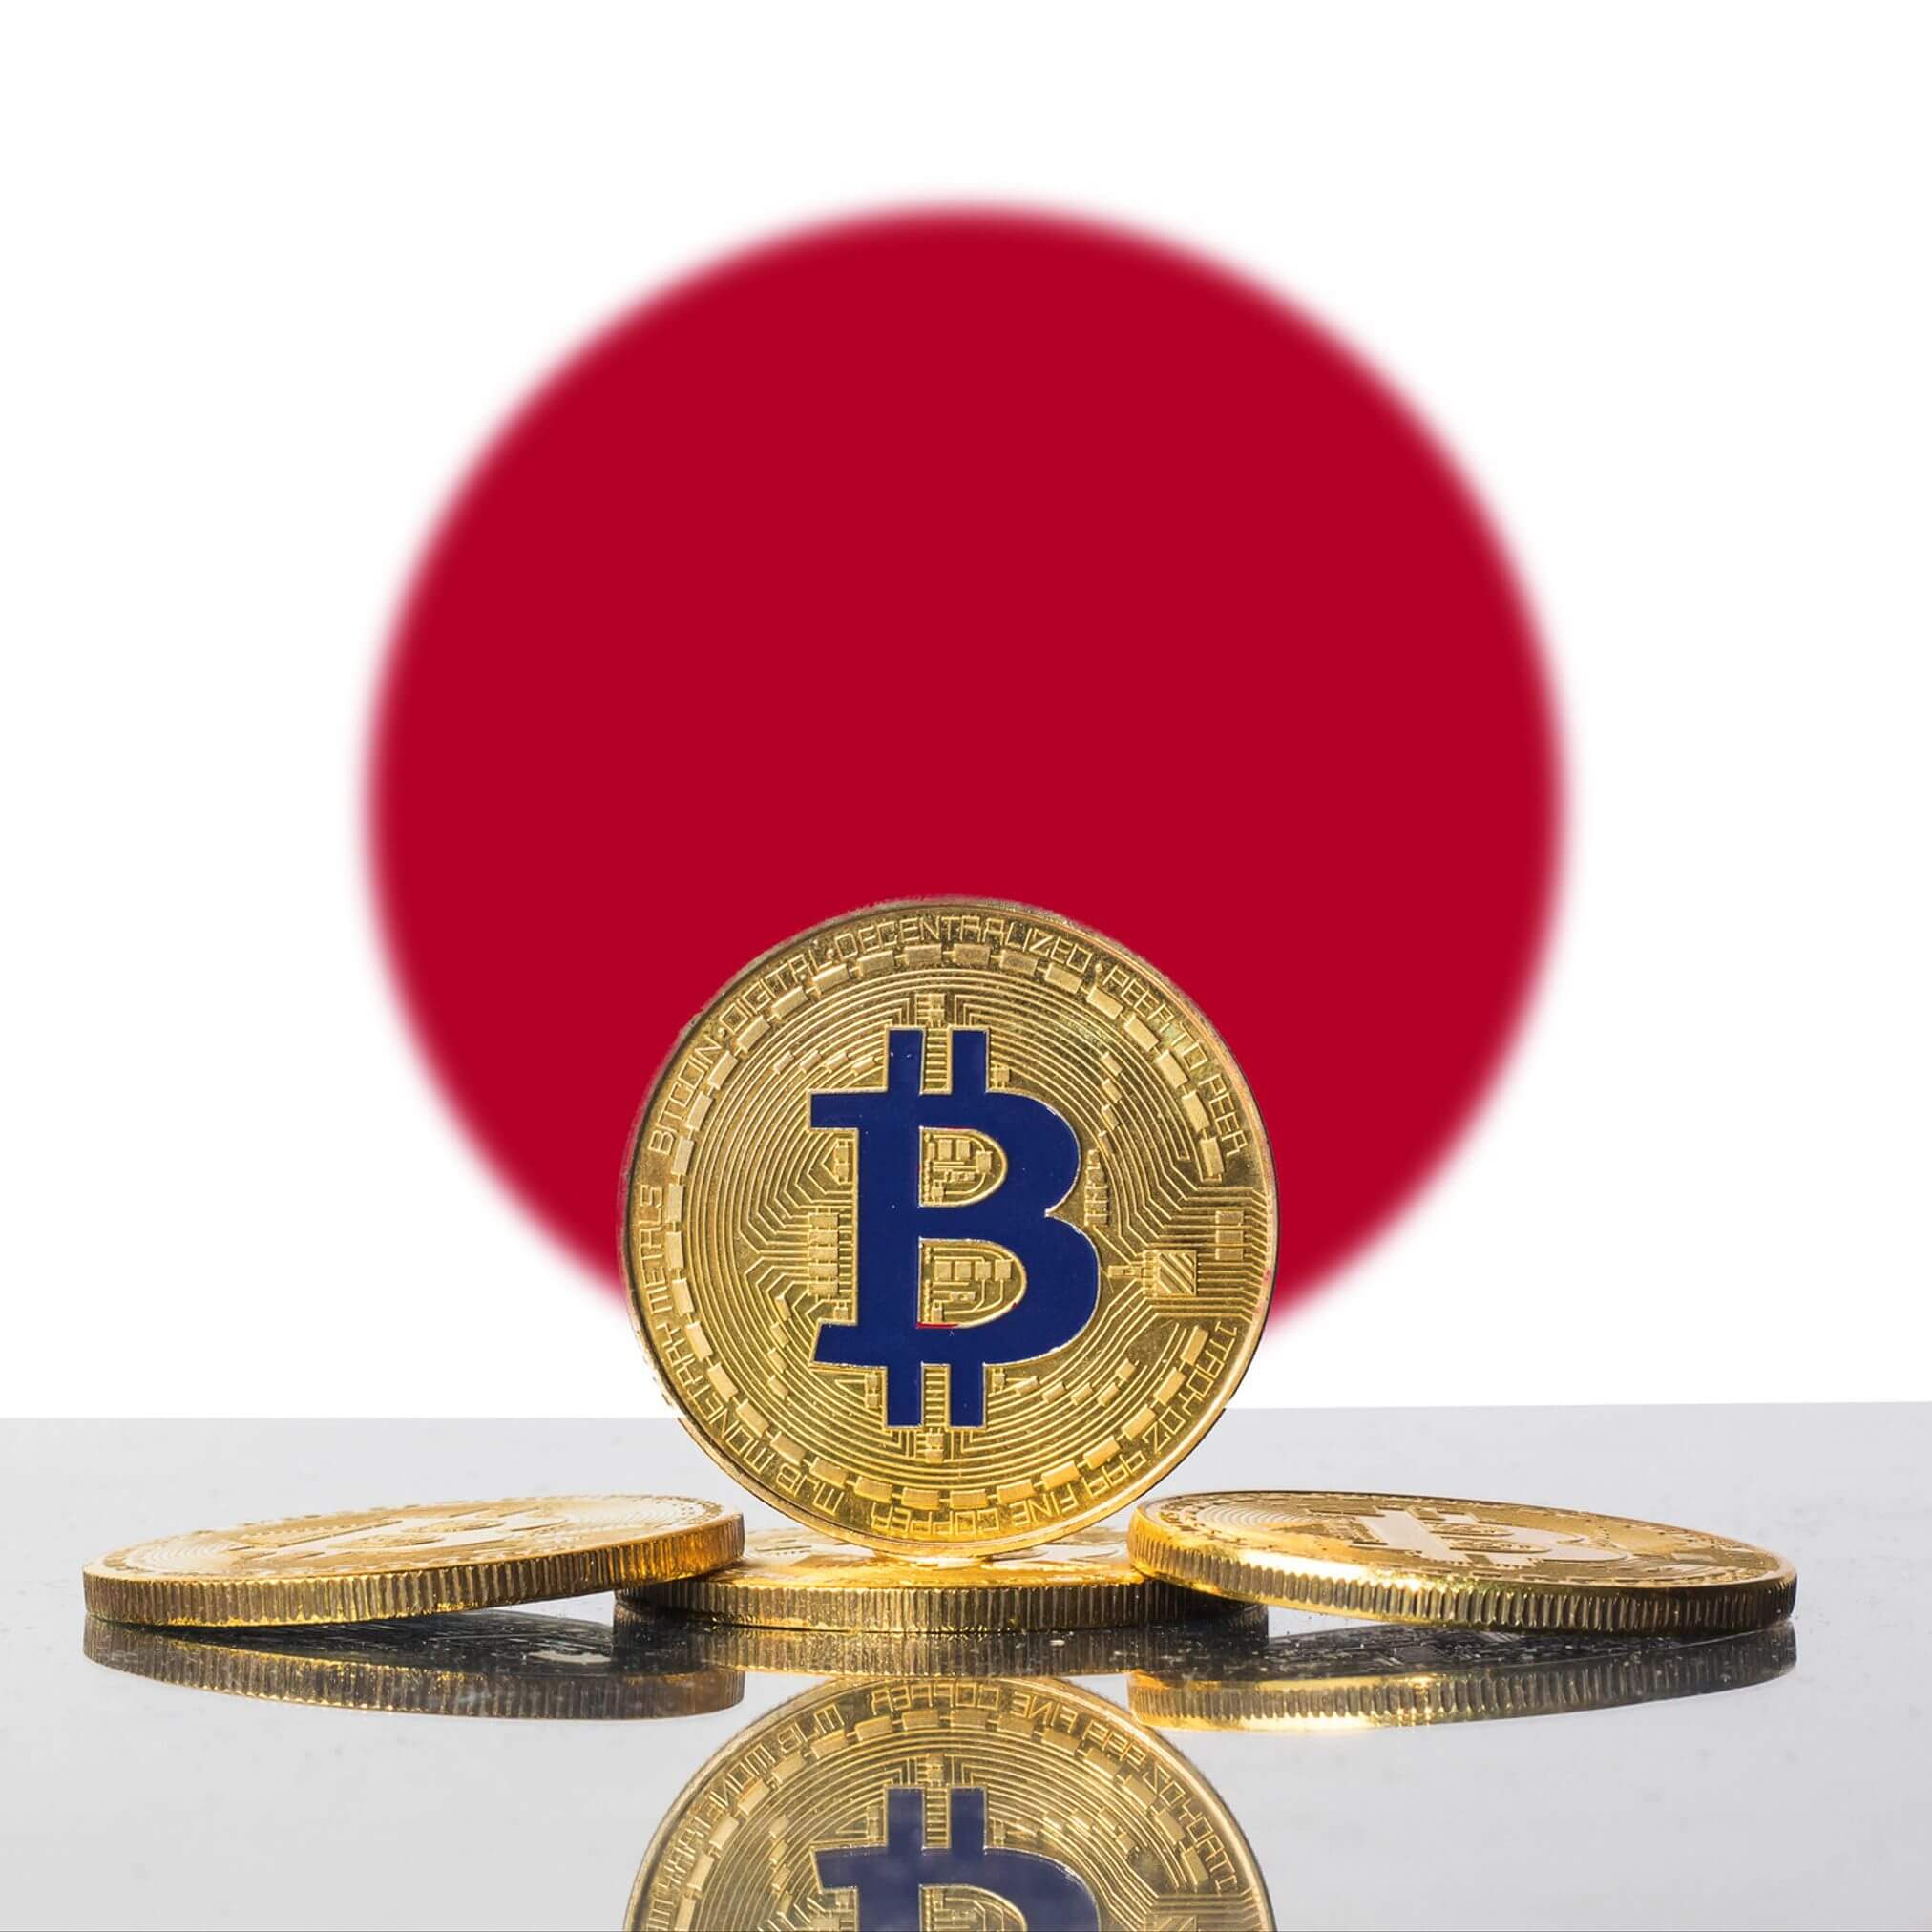 More crypto exchanges in Japan have been licensed